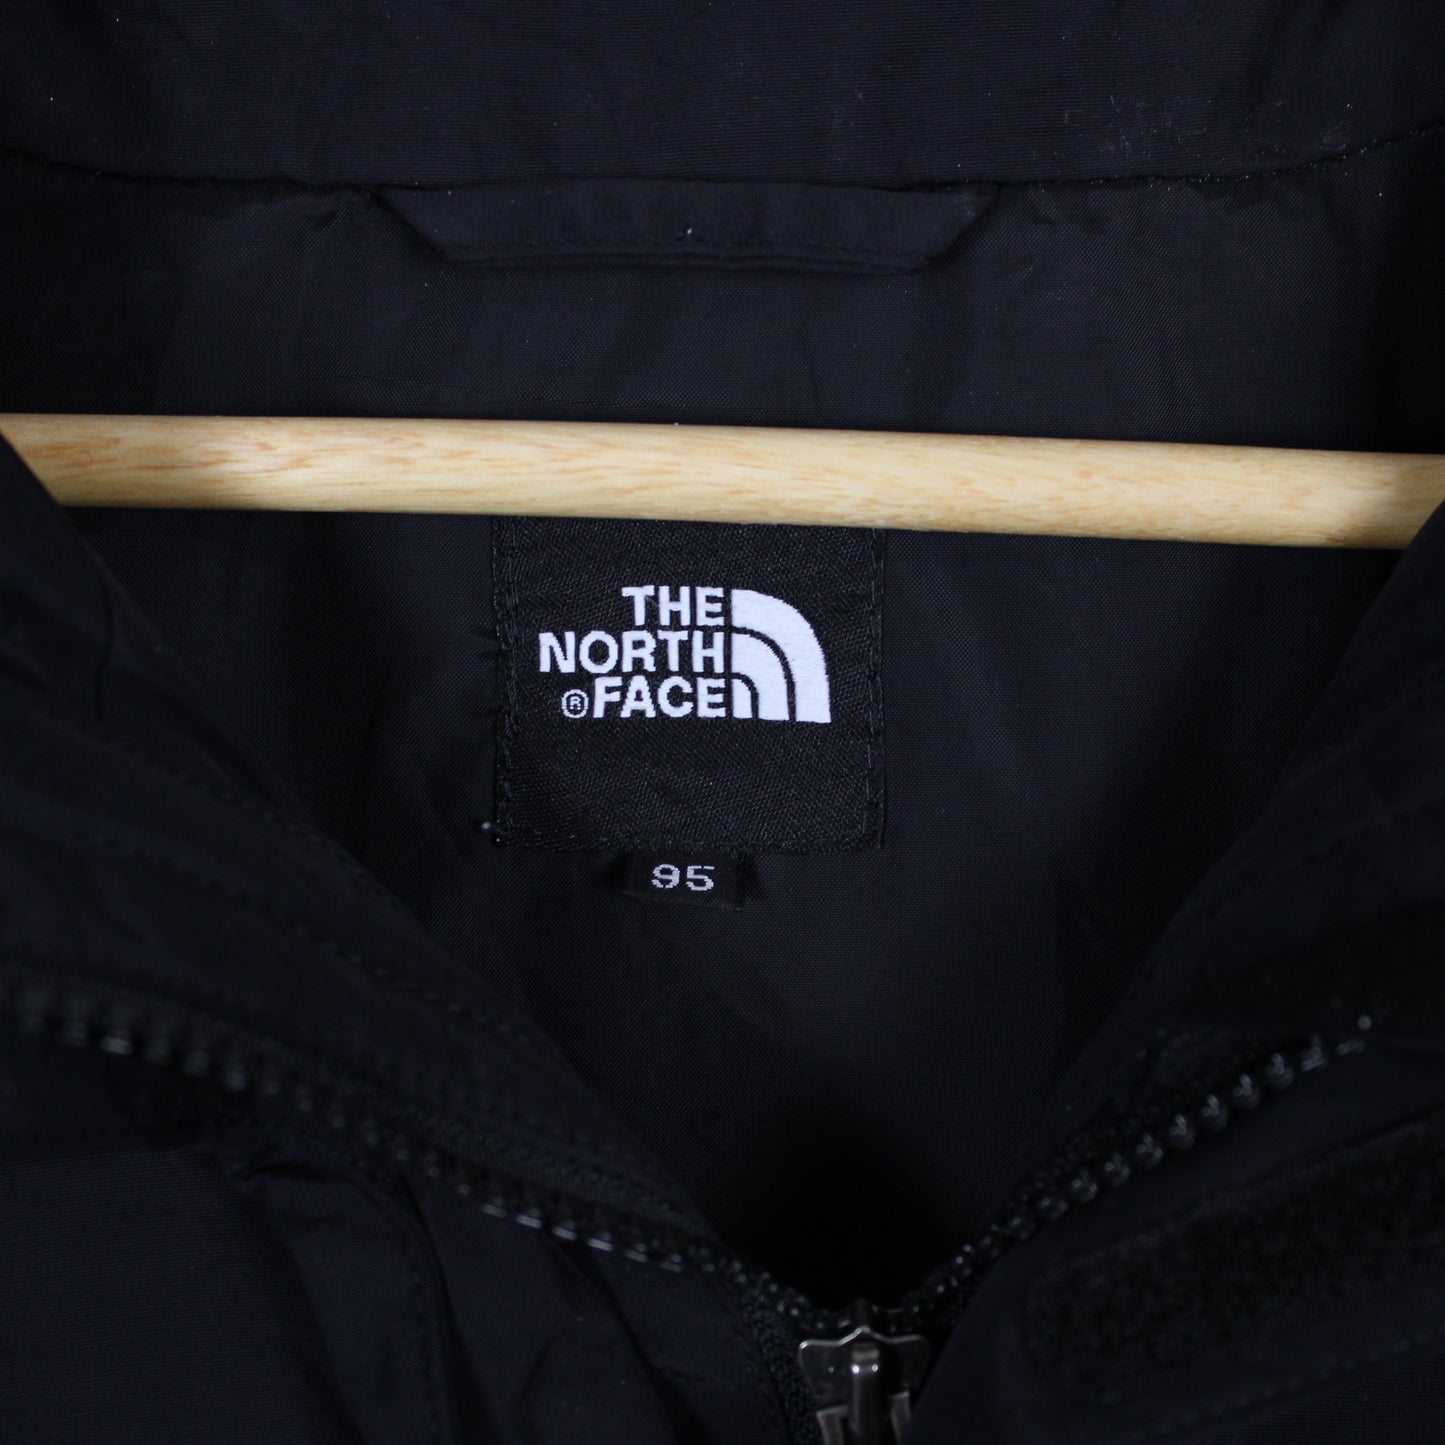 Vintage The North Face HyVent Jacket - M